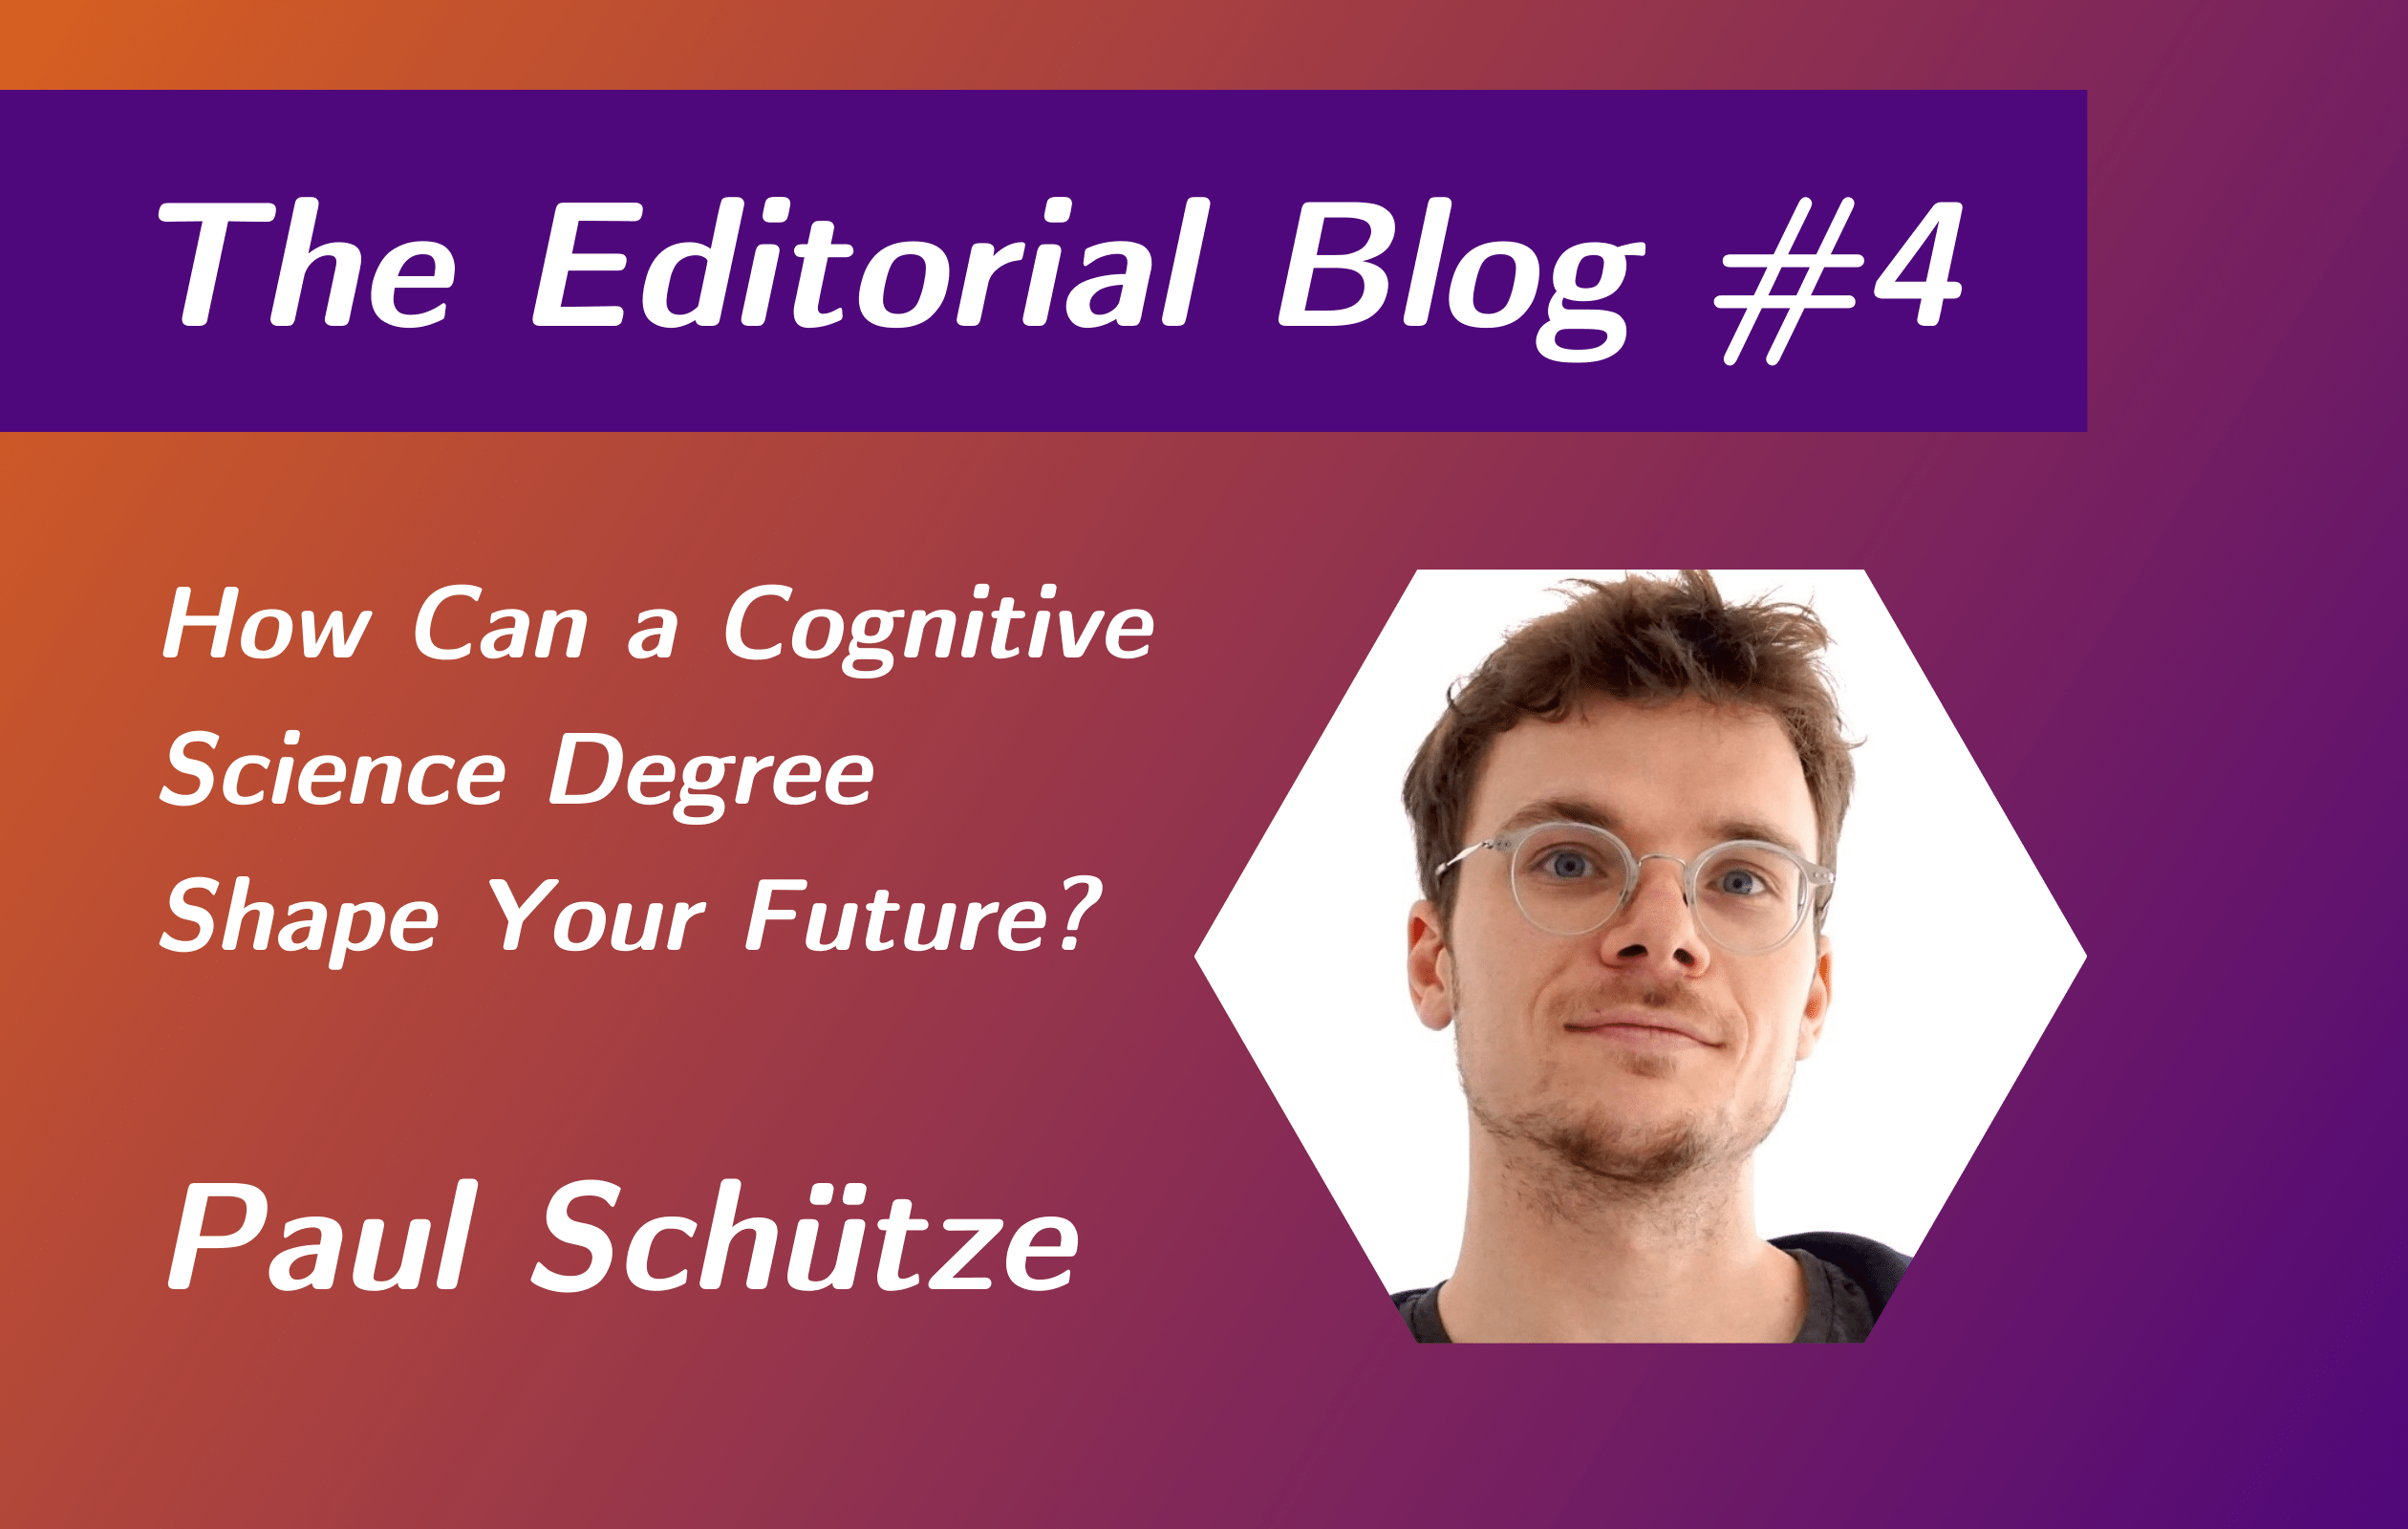 Announcing the fourth editorial board "How can a Cognitive Science Degree Shape Your Future", an interview with Paul Schütze. To the right side an image of him.